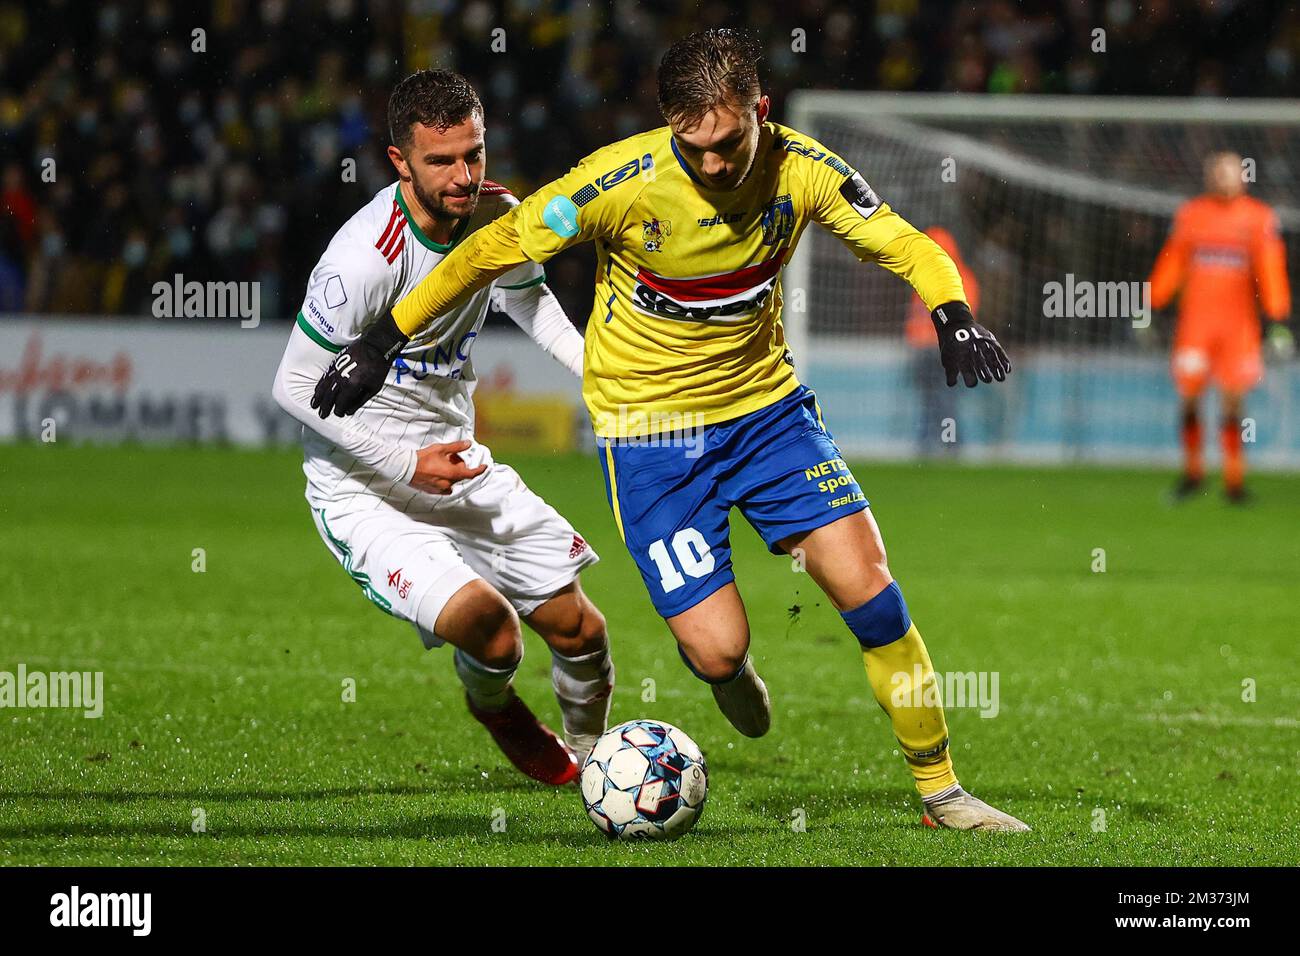 OHL's Siebe Schrijvers and Westerlo's Jan Bernat fight for the ball during  a soccer game between D1B club KVC Westerlo and JPL club OH Leuven,  Wednesday 01 December 2021 in Westerlo, in